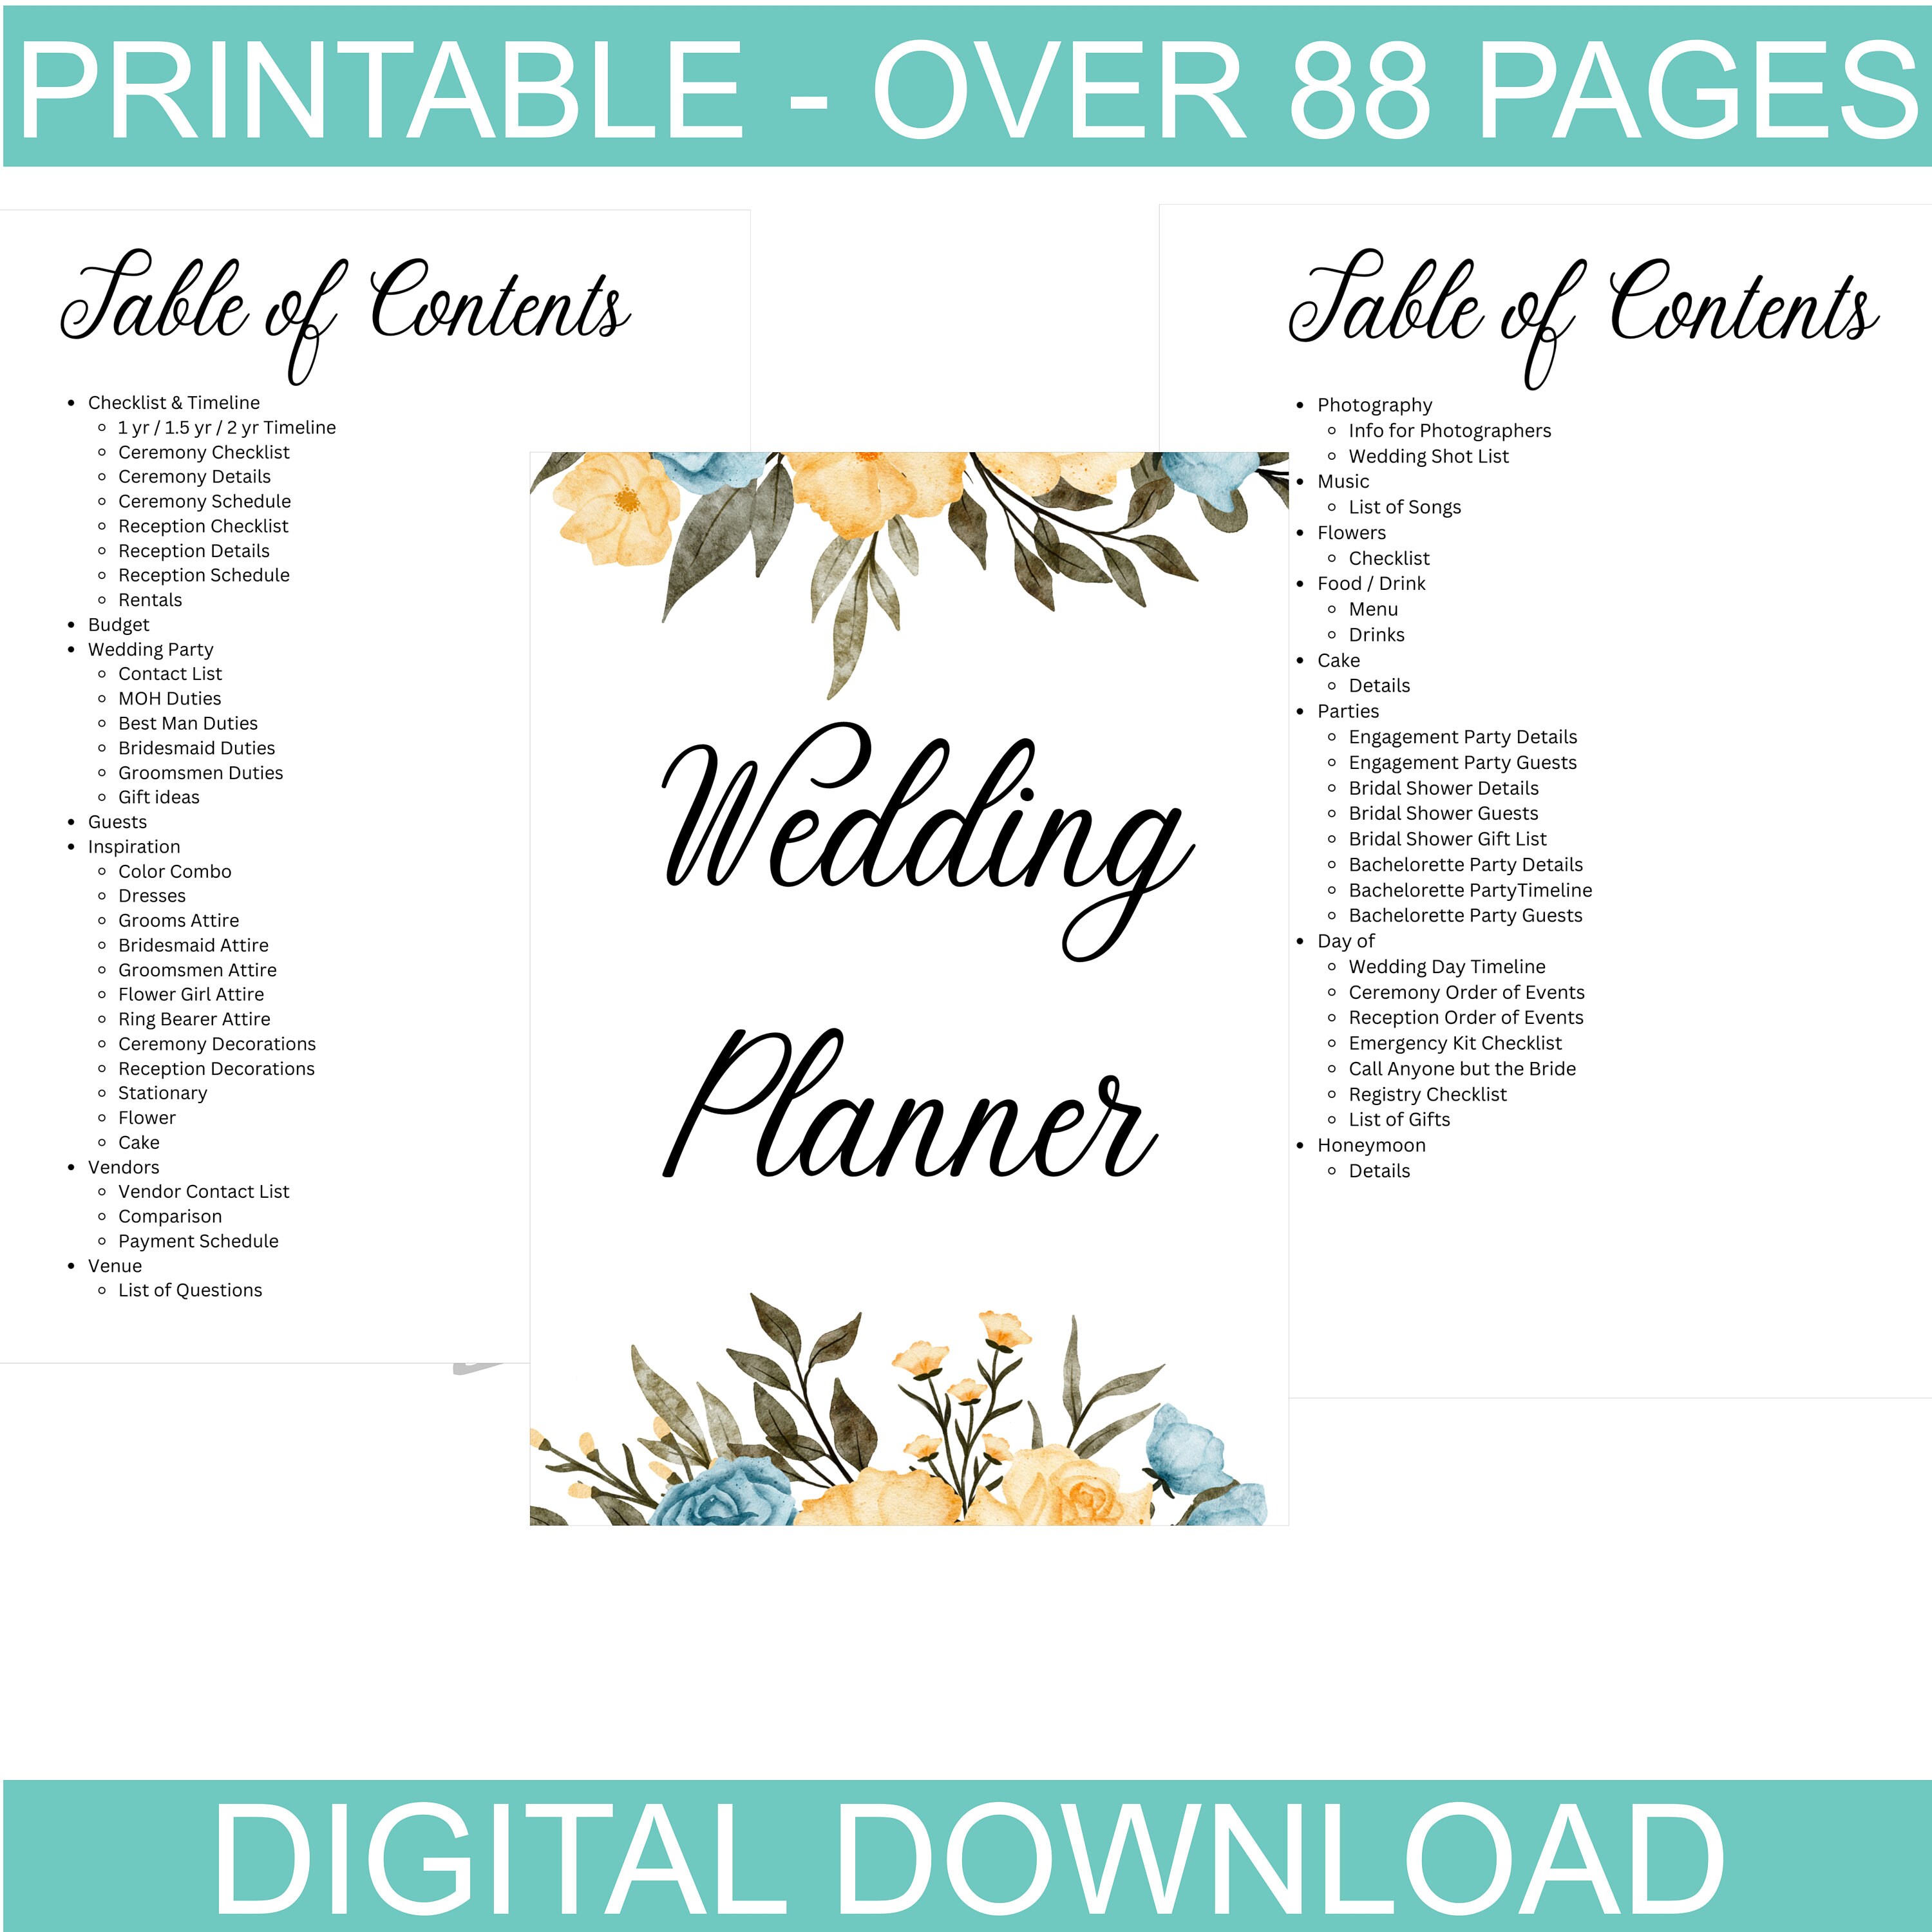 Wedding Caterer Prices: 2022/2023 Expert Guide + Tips